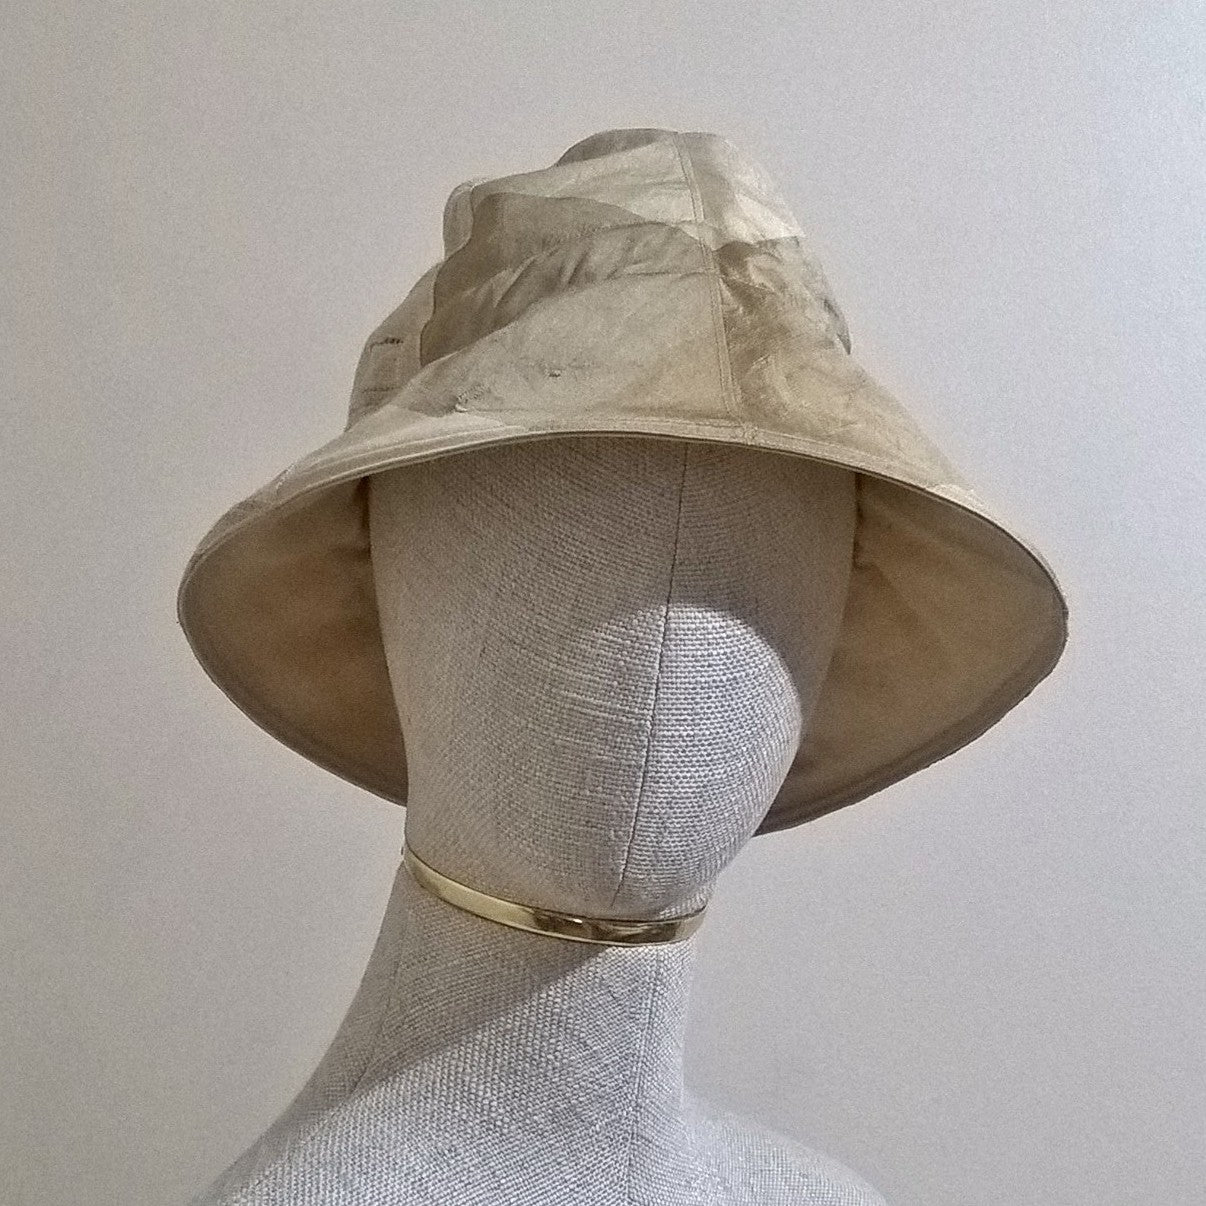 Silk bucket hat in taupe, gold and browns